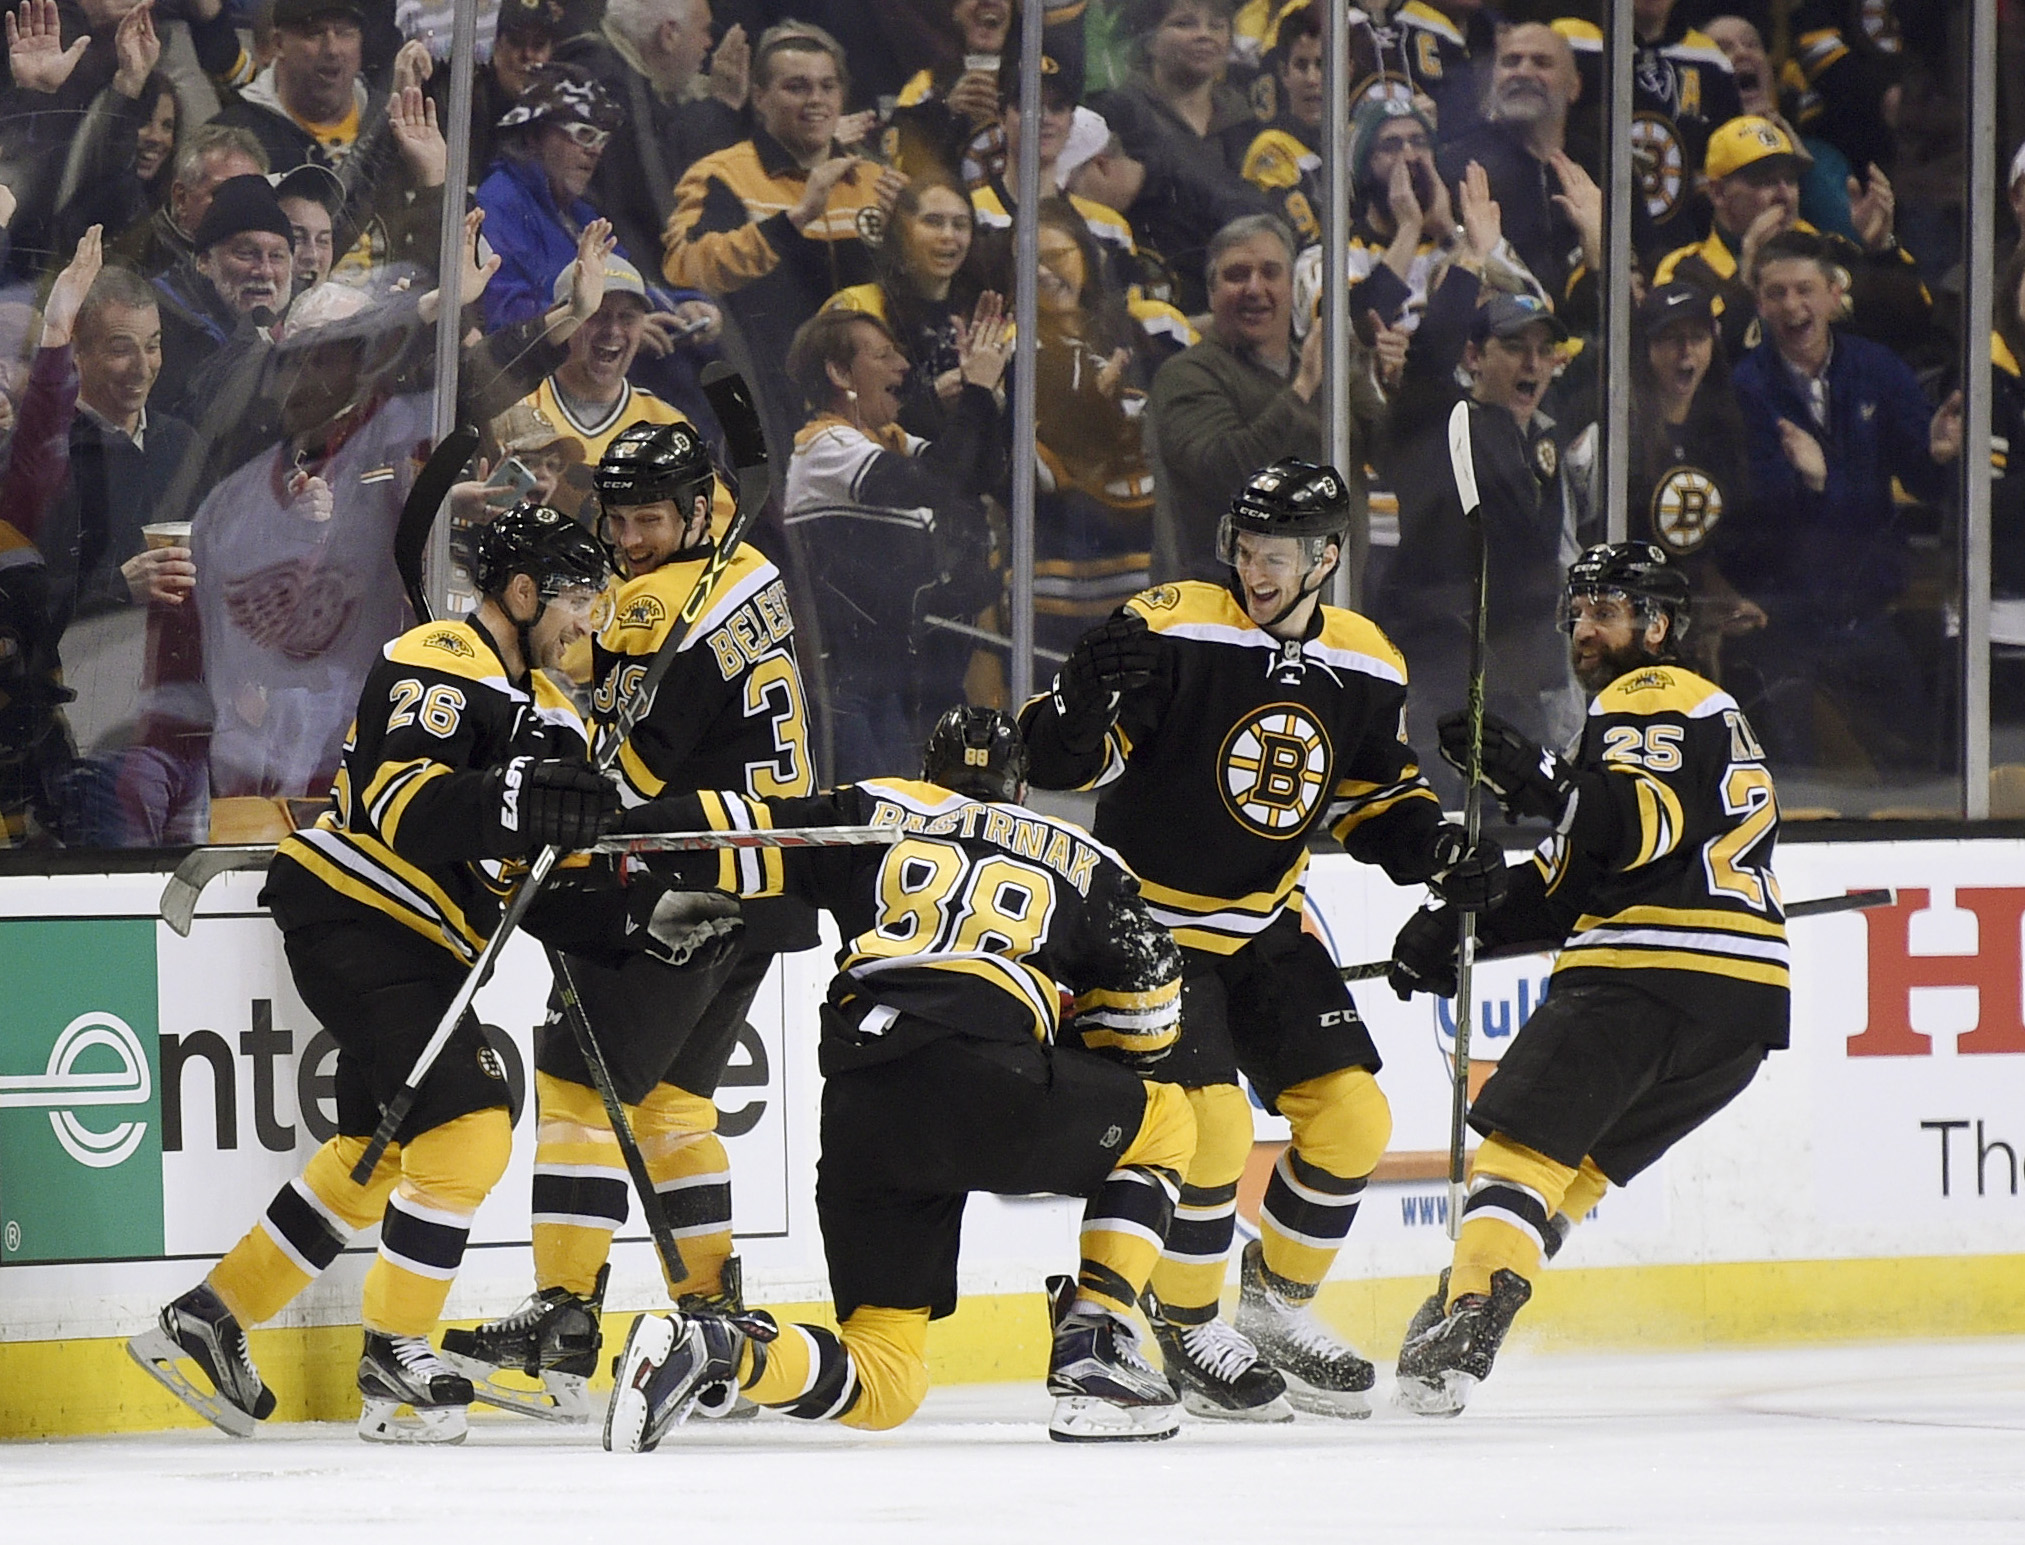 Bruins' playoffs hopes live on with win over Red Wings